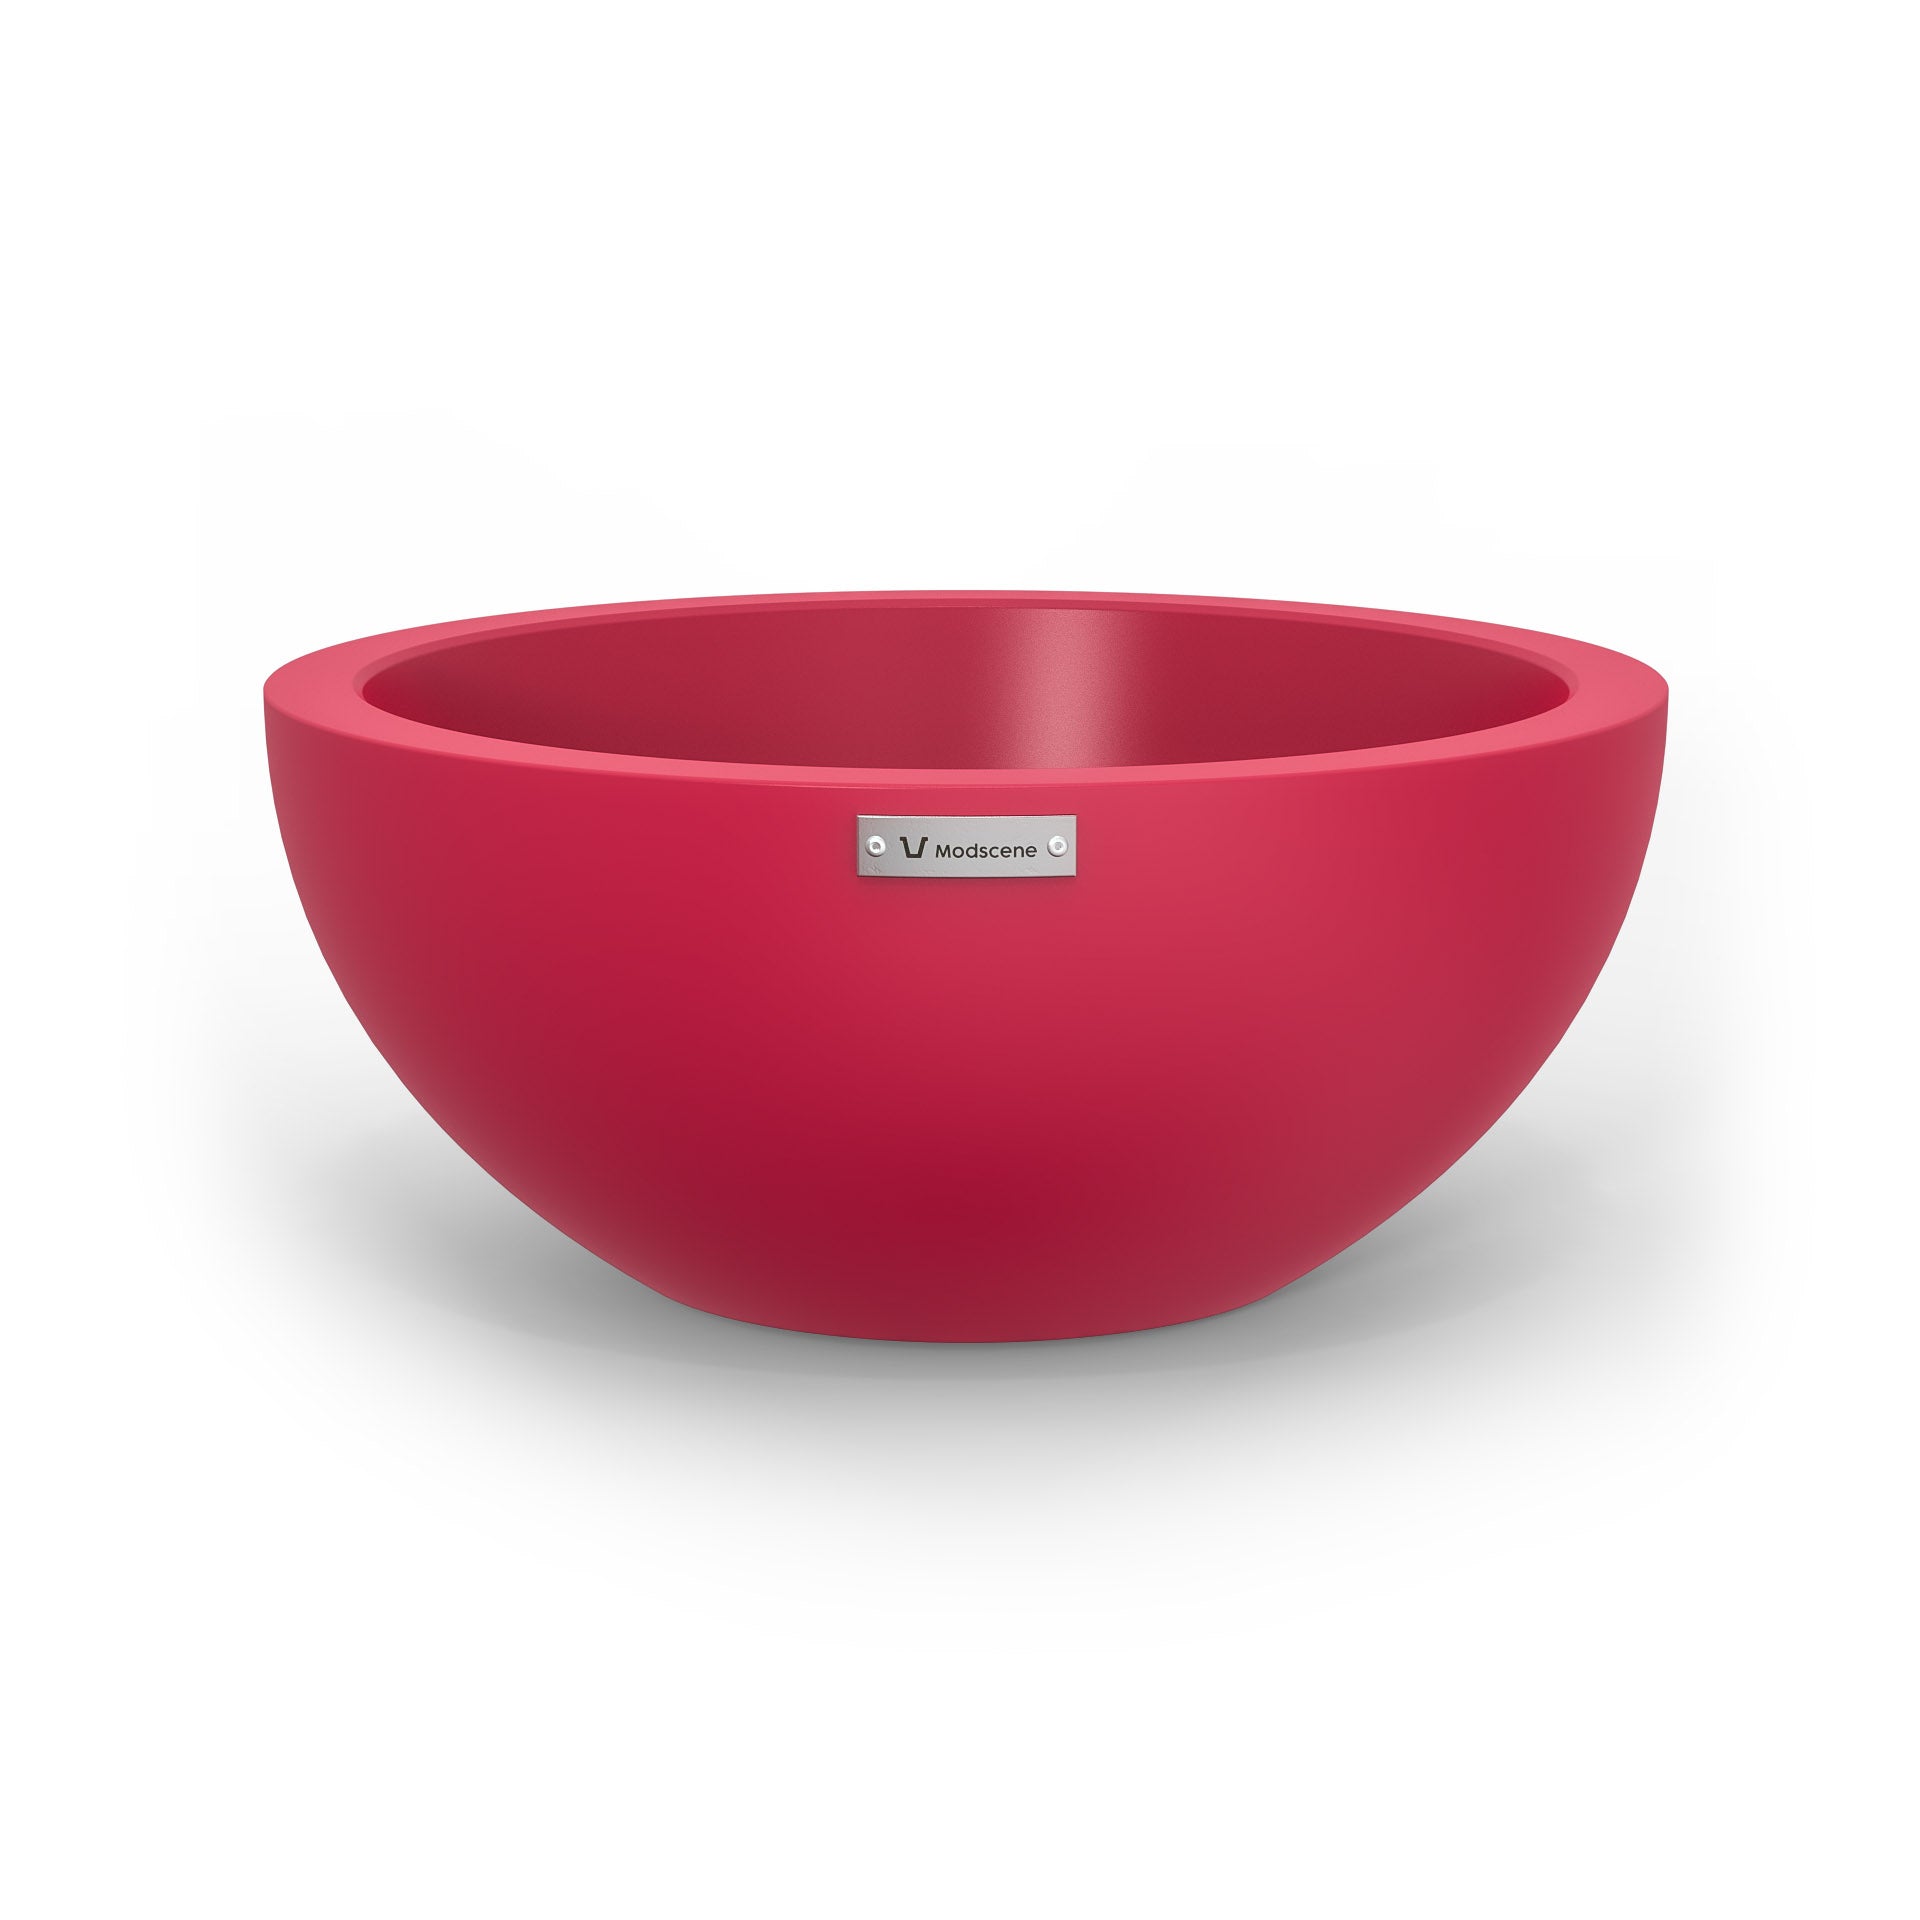 A small planter bowl in pink made by Modscene. Australian planters.